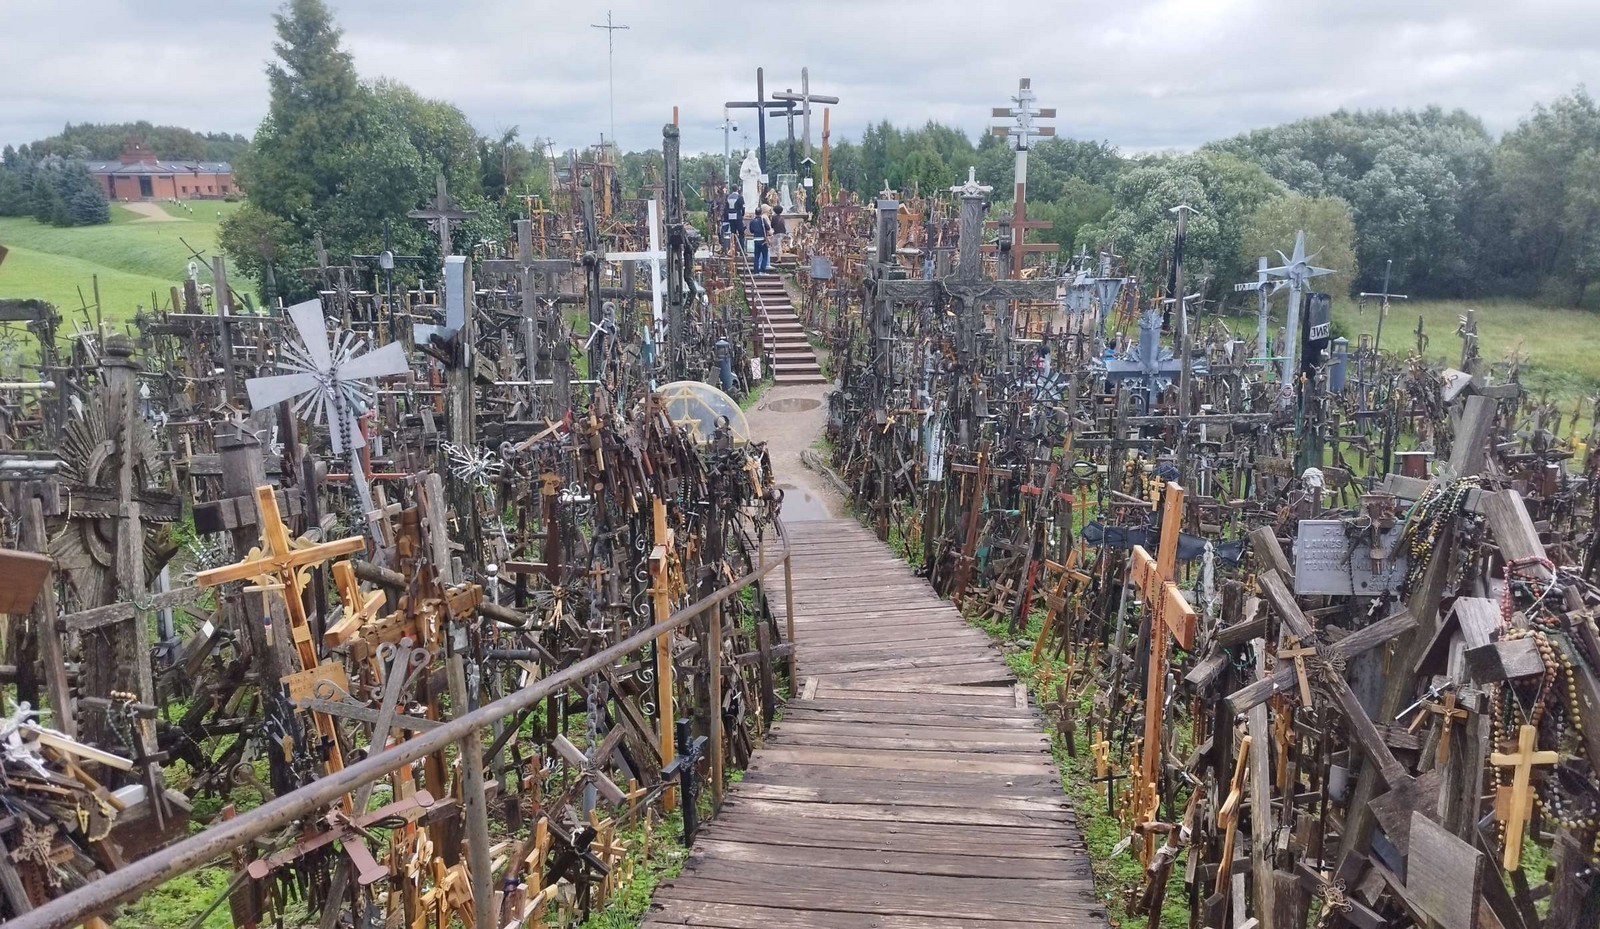 HILL OF CROSSES LITHUANIA